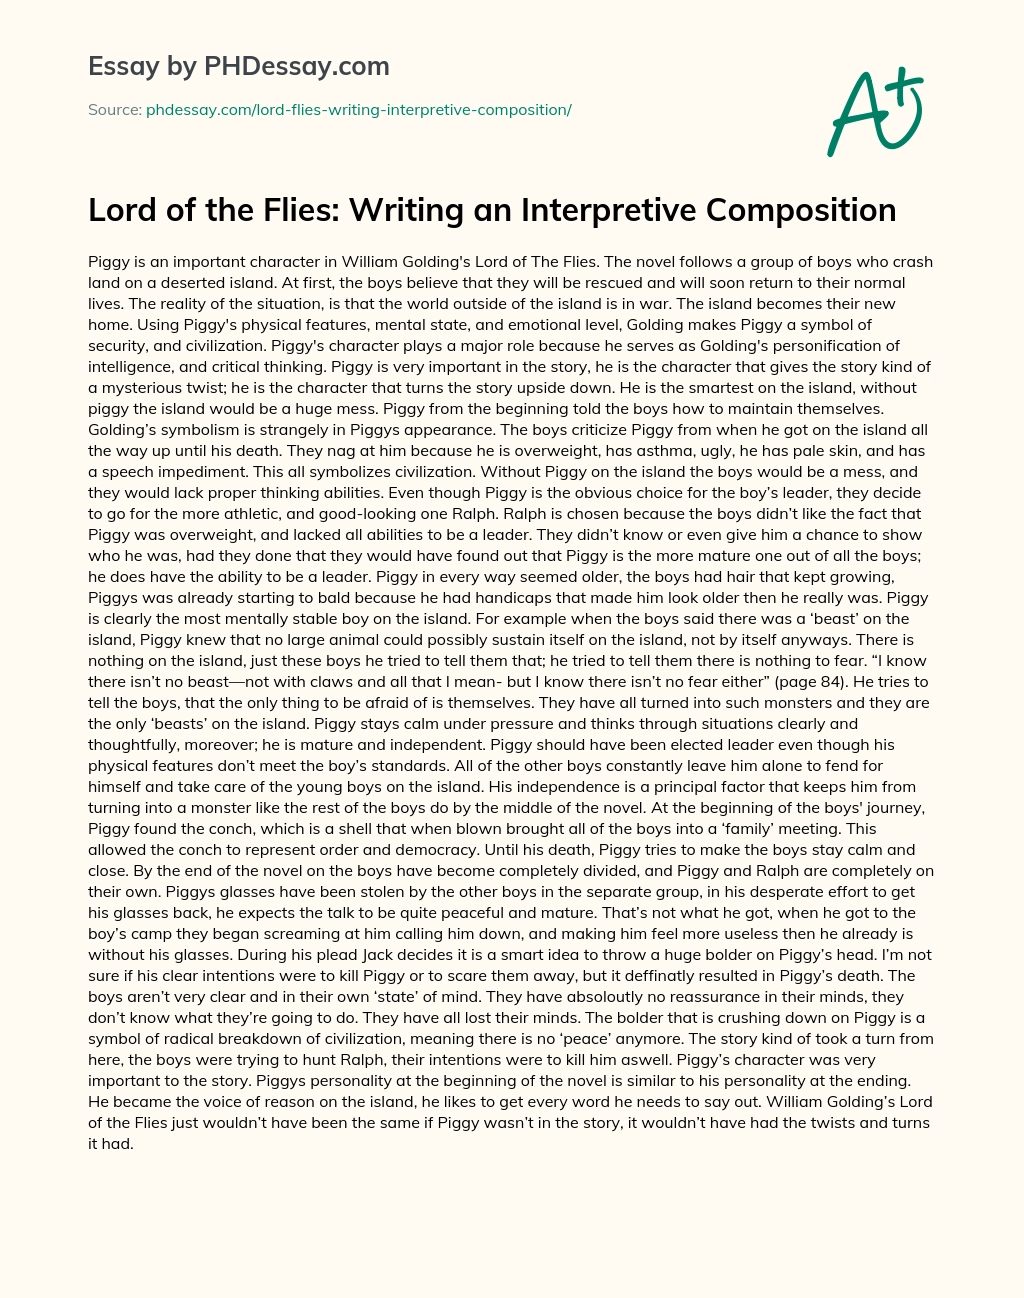 Lord of the Flies: Writing an Interpretive Composition essay